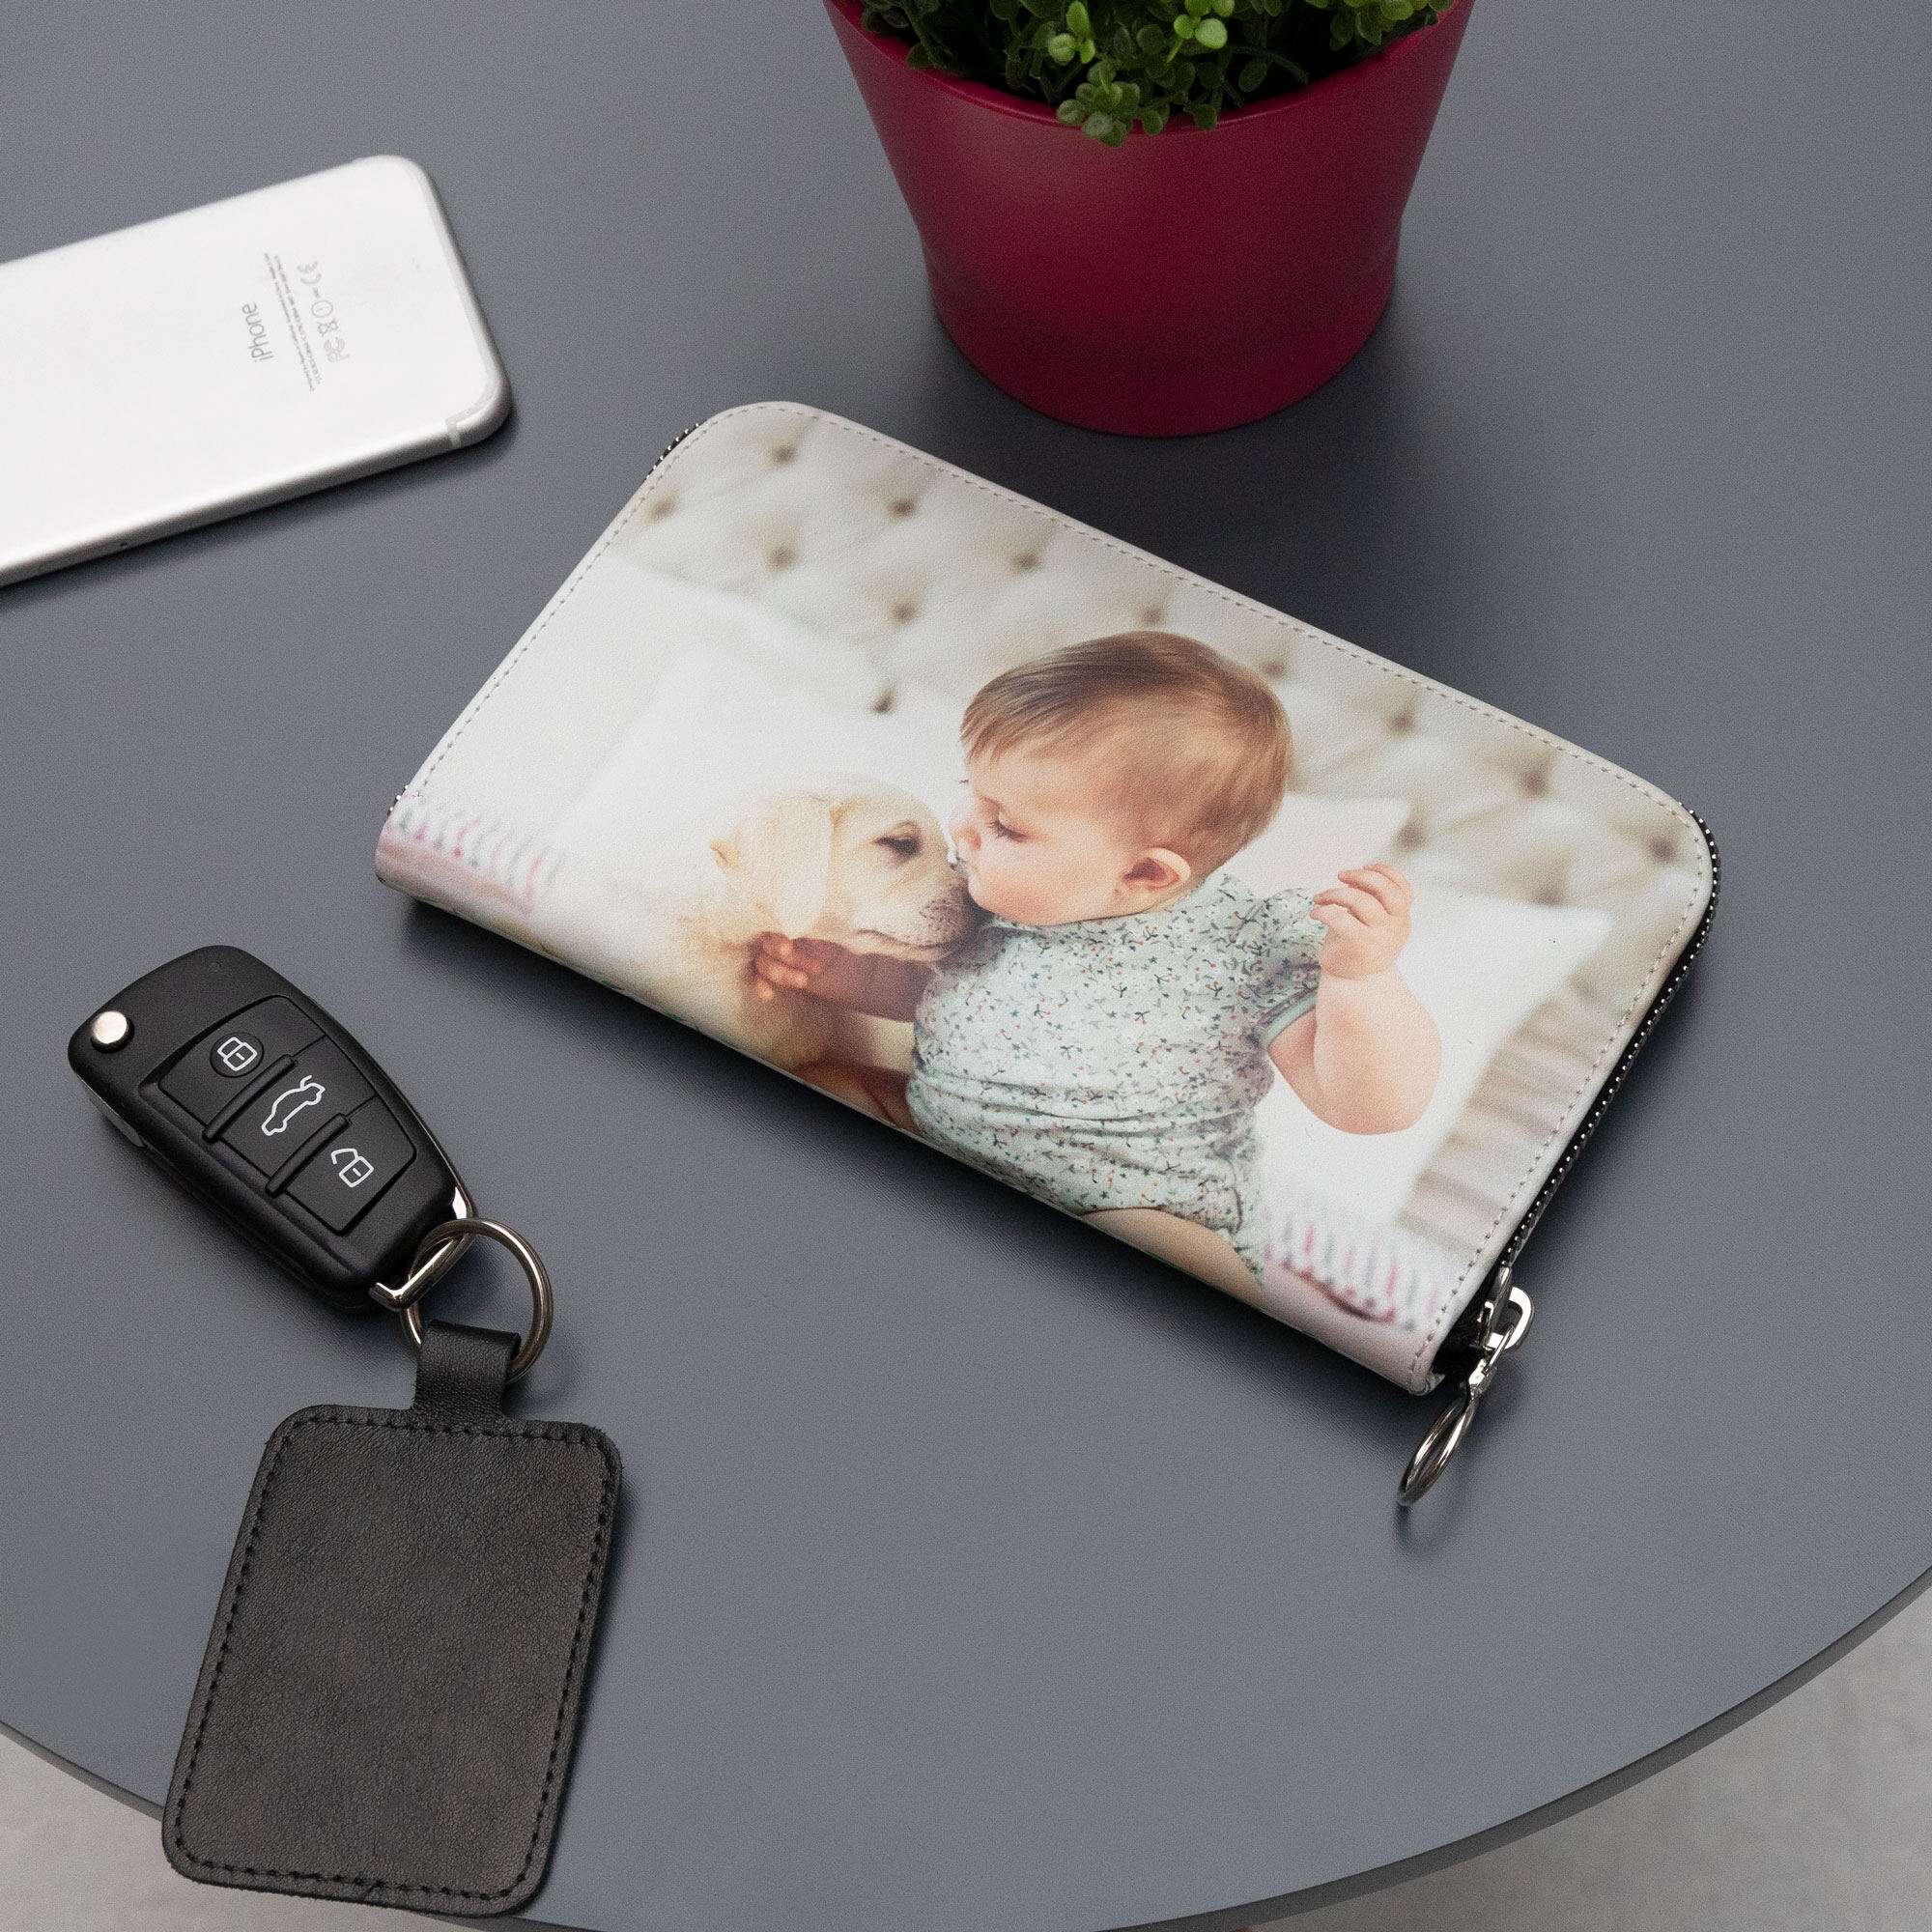 Stunning Leather Purse with Your Photo Printed on a Metal Card – Vida Vida  Leather Bags & Accessories